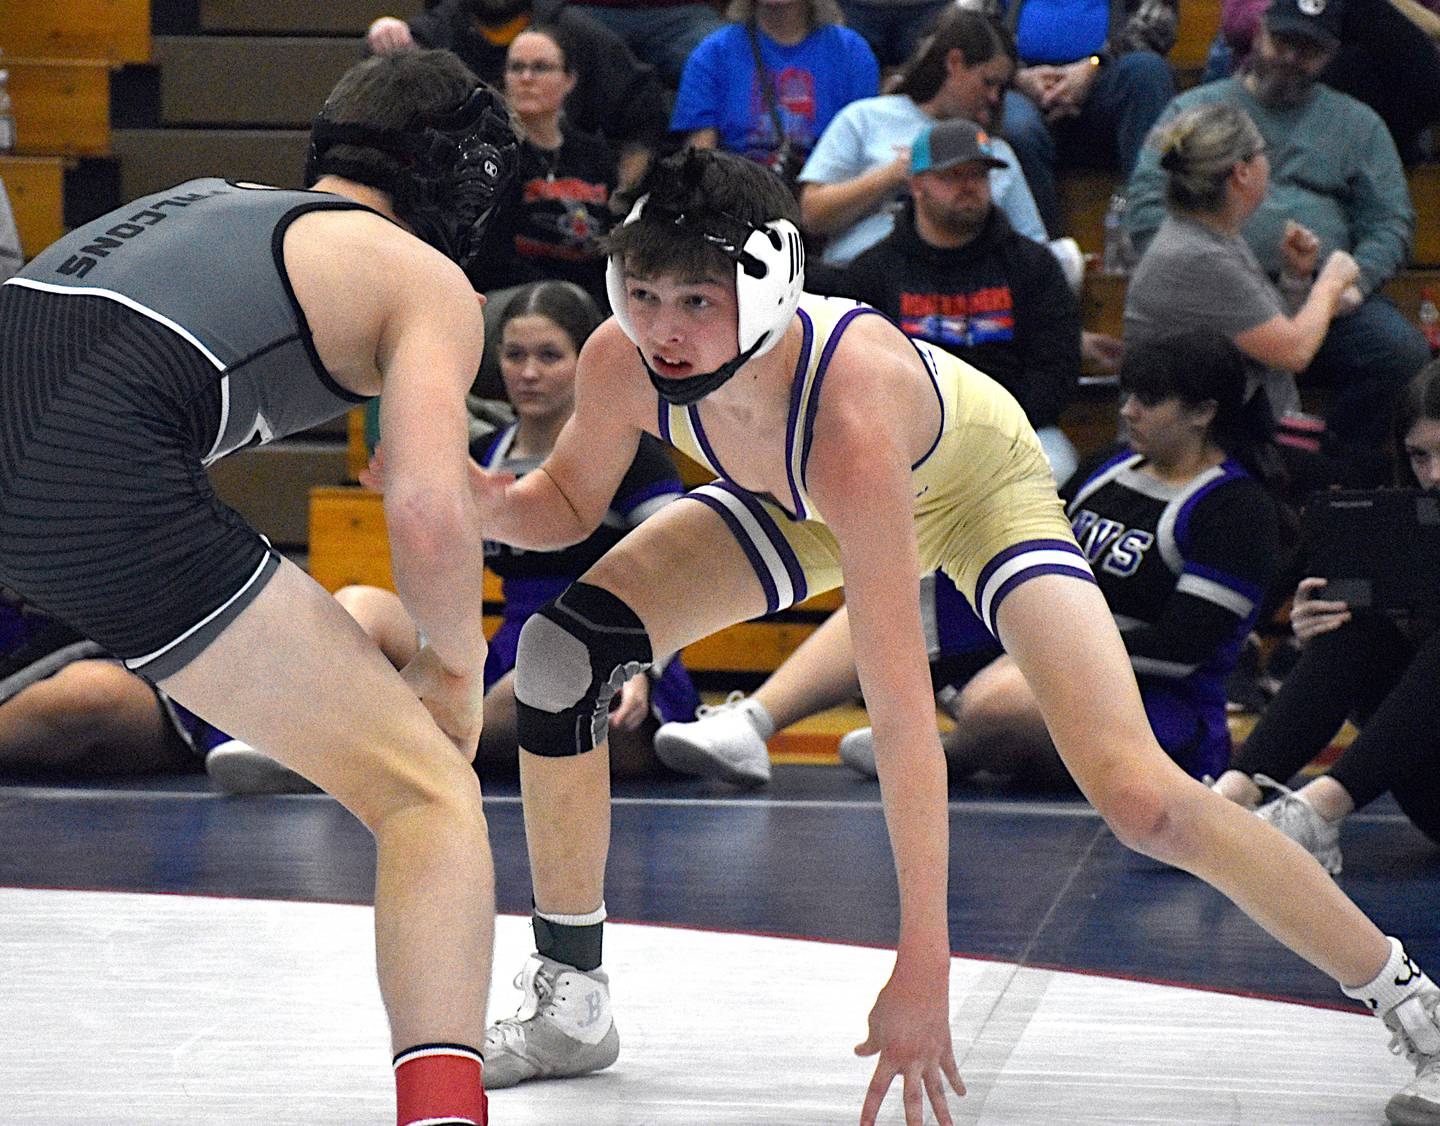 Ty Strode looks for his next shot against an opponent from Wayne at the district tournament Saturday, Feb. 10 at Interstate 35.